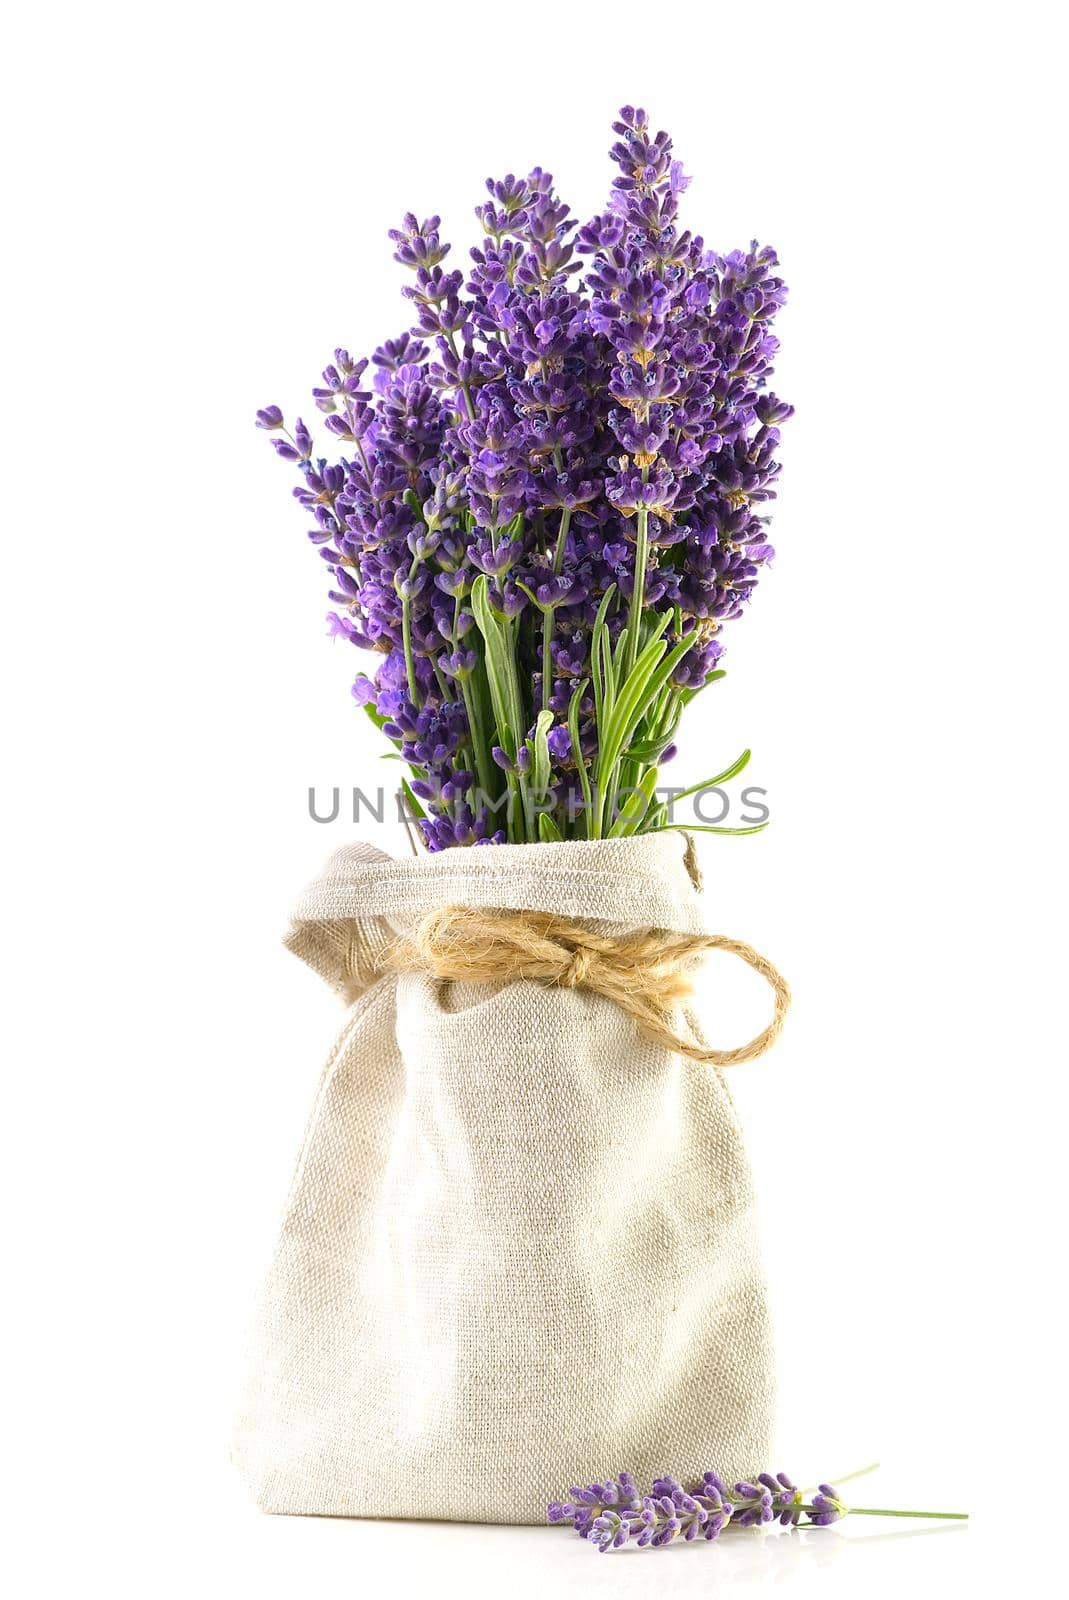 Aromatic Lavender flowers bundle on a white background. Isolated morning Lavender flowers by PhotoTime